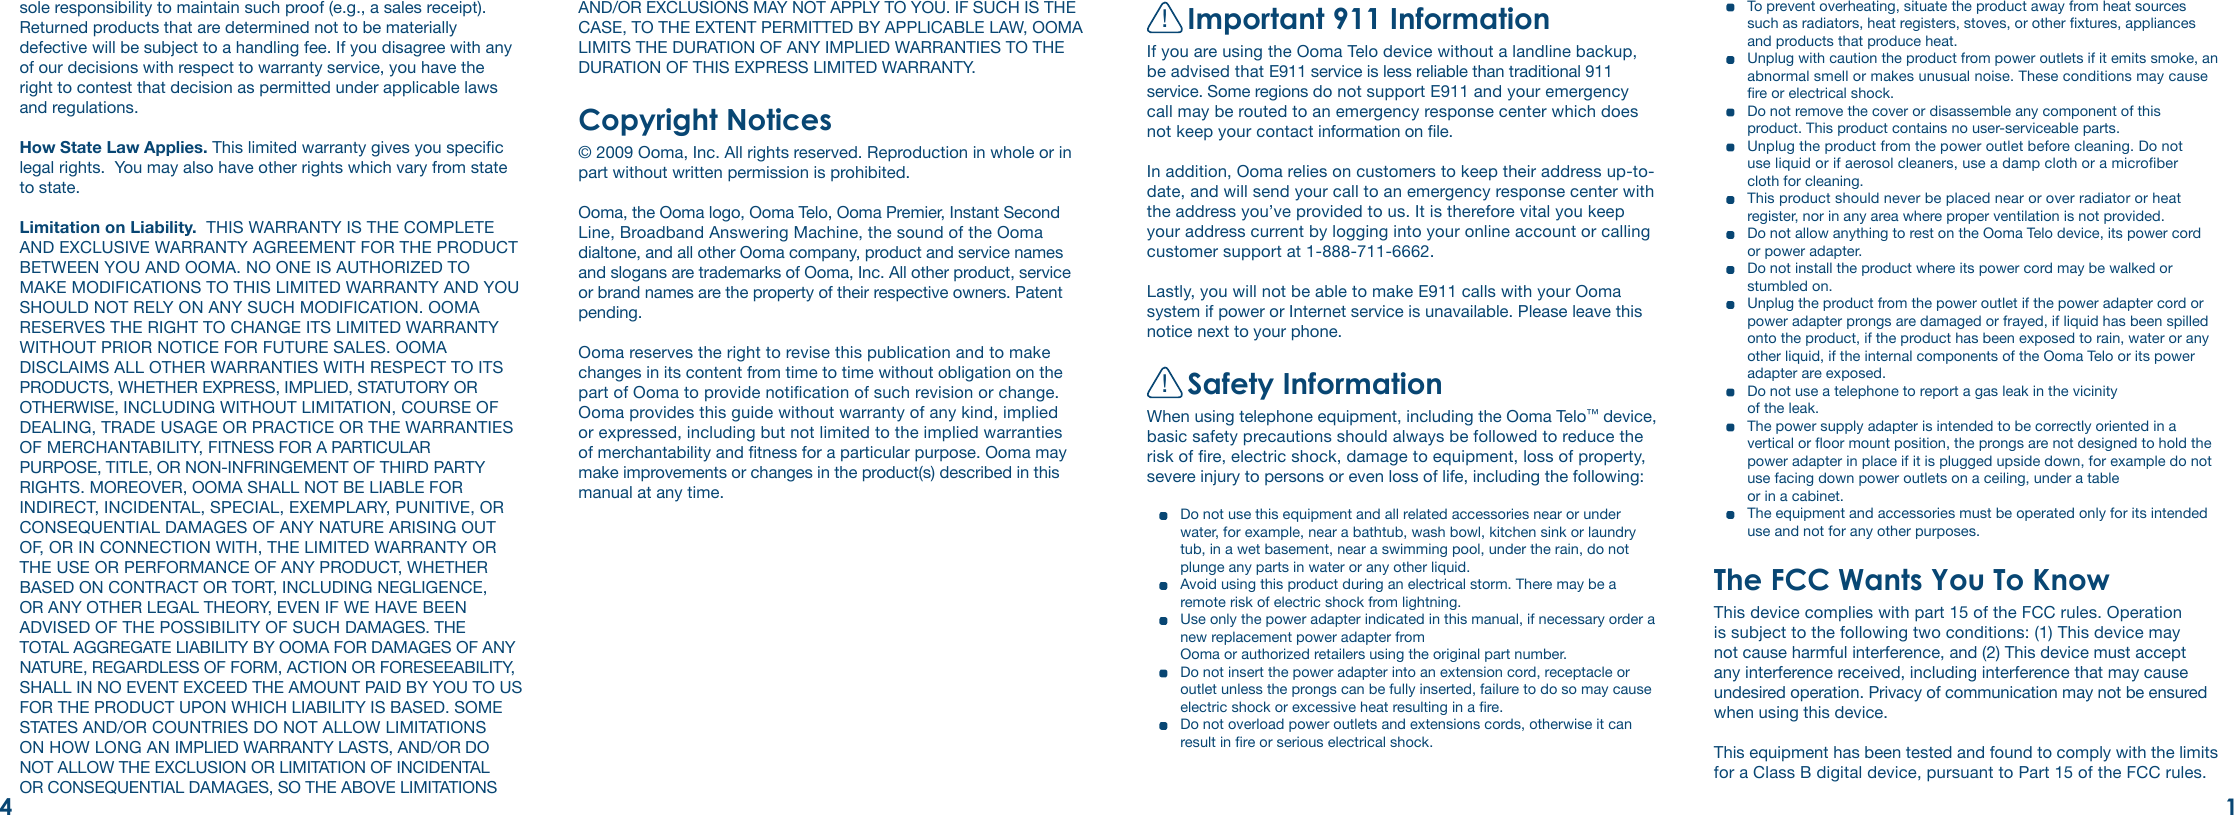 !Important 911 InformationIf you are using the Ooma Telo device without a landline backup, be advised that E911 service is less reliable than traditional 911 service. Some regions do not support E911 and your emergency call may be routed to an emergency response center which does not keep your contact information on le. In addition, Ooma relies on customers to keep their address up-to-date, and will send your call to an emergency response center with the address you’ve provided to us. It is therefore vital you keep your address current by logging into your online account or calling customer support at 1-888-711-6662. Lastly, you will not be able to make E911 calls with your Ooma system if power or Internet service is unavailable. Please leave this notice next to your phone.!Safety InformationWhen using telephone equipment, including the Ooma Telo™ device, basic safety precautions should always be followed to reduce the risk of re, electric shock, damage to equipment, loss of property, severe injury to persons or even loss of life, including the following:  Do not use this equipment and all related accessories near or under water, for example, near a bathtub, wash bowl, kitchen sink or laundry tub, in a wet basement, near a swimming pool, under the rain, do not plunge any parts in water or any other liquid.   Avoid using this product during an electrical storm. There may be a remote risk of electric shock from lightning.   Use only the power adapter indicated in this manual, if necessary order a new replacement power adapter from  Ooma or authorized retailers using the original part number.   Do not insert the power adapter into an extension cord, receptacle or outlet unless the prongs can be fully inserted, failure to do so may cause electric shock or excessive heat resulting in a re.  Do not overload power outlets and extensions cords, otherwise it can result in re or serious electrical shock.sole responsibility to maintain such proof (e.g., a sales receipt). Returned products that are determined not to be materially defective will be subject to a handling fee. If you disagree with any of our decisions with respect to warranty service, you have the right to contest that decision as permitted under applicable laws and regulations.How State Law Applies. This limited warranty gives you specic legal rights.  You may also have other rights which vary from state to state.Limitation on Liability.  THIS WARRANTY IS THE COMPLETE AND EXCLUSIVE WARRANTY AGREEMENT FOR THE PRODUCT BETWEEN YOU AND OOMA. NO ONE IS AUTHORIZED TO MAKE MODIFICATIONS TO THIS LIMITED WARRANTY AND YOU SHOULD NOT RELY ON ANY SUCH MODIFICATION. OOMA RESERVES THE RIGHT TO CHANGE ITS LIMITED WARRANTY WITHOUT PRIOR NOTICE FOR FUTURE SALES. OOMA DISCLAIMS ALL OTHER WARRANTIES WITH RESPECT TO ITS PRODUCTS, WHETHER EXPRESS, IMPLIED, STATUTORY OR OTHERWISE, INCLUDING WITHOUT LIMITATION, COURSE OF DEALING, TRADE USAGE OR PRACTICE OR THE WARRANTIES OF MERCHANTABILITY, FITNESS FOR A PARTICULAR PURPOSE, TITLE, OR NON-INFRINGEMENT OF THIRD PARTY RIGHTS. MOREOVER, OOMA SHALL NOT BE LIABLE FOR INDIRECT, INCIDENTAL, SPECIAL, EXEMPLARY, PUNITIVE, OR CONSEQUENTIAL DAMAGES OF ANY NATURE ARISING OUT OF, OR IN CONNECTION WITH, THE LIMITED WARRANTY OR THE USE OR PERFORMANCE OF ANY PRODUCT, WHETHER BASED ON CONTRACT OR TORT, INCLUDING NEGLIGENCE, OR ANY OTHER LEGAL THEORY, EVEN IF WE HAVE BEEN ADVISED OF THE POSSIBILITY OF SUCH DAMAGES. THE TOTAL AGGREGATE LIABILITY BY OOMA FOR DAMAGES OF ANY NATURE, REGARDLESS OF FORM, ACTION OR FORESEEABILITY, SHALL IN NO EVENT EXCEED THE AMOUNT PAID BY YOU TO US FOR THE PRODUCT UPON WHICH LIABILITY IS BASED. SOME STATES AND/OR COUNTRIES DO NOT ALLOW LIMITATIONS ON HOW LONG AN IMPLIED WARRANTY LASTS, AND/OR DO NOT ALLOW THE EXCLUSION OR LIMITATION OF INCIDENTAL OR CONSEQUENTIAL DAMAGES, SO THE ABOVE LIMITATIONS   To prevent overheating, situate the product away from heat sources such as radiators, heat registers, stoves, or other xtures, appliances and products that produce heat.   Unplug with caution the product from power outlets if it emits smoke, an abnormal smell or makes unusual noise. These conditions may cause re or electrical shock.   Do not remove the cover or disassemble any component of this product. This product contains no user-serviceable parts.   Unplug the product from the power outlet before cleaning. Do not  use liquid or if aerosol cleaners, use a damp cloth or a microber  cloth for cleaning.   This product should never be placed near or over radiator or heat register, nor in any area where proper ventilation is not provided.   Do not allow anything to rest on the Ooma Telo device, its power cord  or power adapter.   Do not install the product where its power cord may be walked or stumbled on.  Unplug the product from the power outlet if the power adapter cord or power adapter prongs are damaged or frayed, if liquid has been spilled onto the product, if the product has been exposed to rain, water or any other liquid, if the internal components of the Ooma Telo or its power adapter are exposed.   Do not use a telephone to report a gas leak in the vicinity  of the leak.   The power supply adapter is intended to be correctly oriented in a vertical or oor mount position, the prongs are not designed to hold the power adapter in place if it is plugged upside down, for example do not use facing down power outlets on a ceiling, under a table  or in a cabinet.   The equipment and accessories must be operated only for its intended use and not for any other purposes.The FCC Wants You To KnowThis device complies with part 15 of the FCC rules. Operation is subject to the following two conditions: (1) This device may not cause harmful interference, and (2) This device must accept any interference received, including interference that may cause undesired operation. Privacy of communication may not be ensured when using this device.This equipment has been tested and found to comply with the limits for a Class B digital device, pursuant to Part 15 of the FCC rules. AND/OR EXCLUSIONS MAY NOT APPLY TO YOU. IF SUCH IS THE CASE, TO THE EXTENT PERMITTED BY APPLICABLE LAW, OOMA LIMITS THE DURATION OF ANY IMPLIED WARRANTIES TO THE DURATION OF THIS EXPRESS LIMITED WARRANTY.Copyright Notices© 2009 Ooma, Inc. All rights reserved. Reproduction in whole or in part without written permission is prohibited.Ooma, the Ooma logo, Ooma Telo, Ooma Premier, Instant Second Line, Broadband Answering Machine, the sound of the Ooma dialtone, and all other Ooma company, product and service names and slogans are trademarks of Ooma, Inc. All other product, service or brand names are the property of their respective owners. Patent pending.  Ooma reserves the right to revise this publication and to make changes in its content from time to time without obligation on the part of Ooma to provide notication of such revision or change. Ooma provides this guide without warranty of any kind, implied or expressed, including but not limited to the implied warranties of merchantability and tness for a particular purpose. Ooma may make improvements or changes in the product(s) described in this manual at any time.14